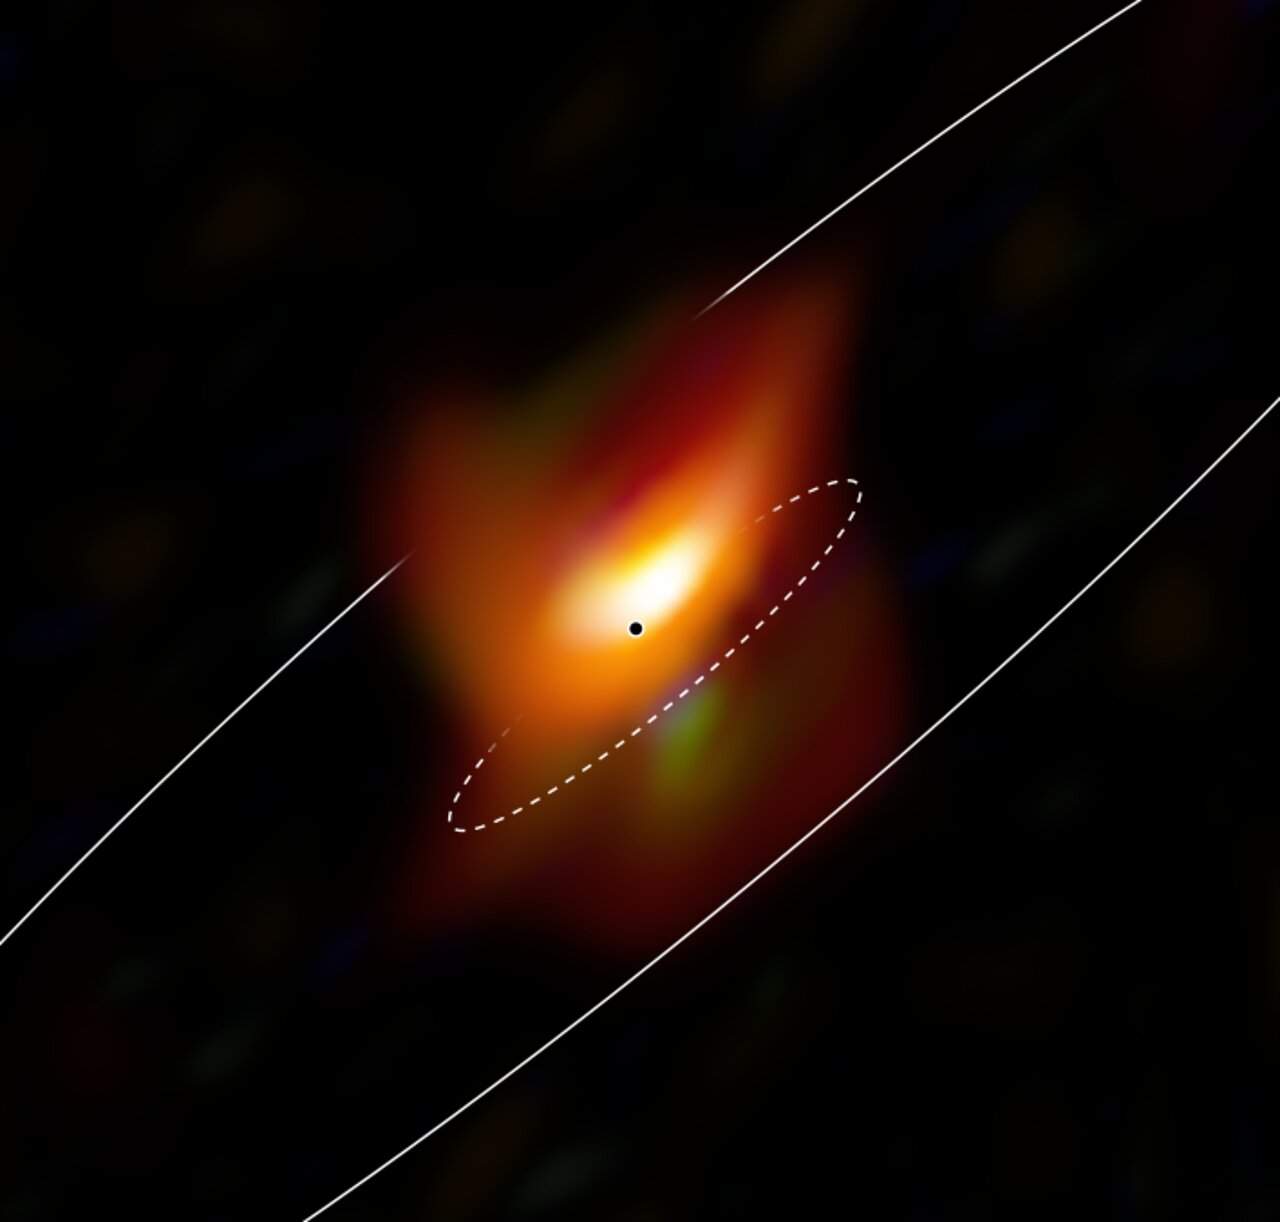 Supermassive black hole observations confirm 30 year old theory